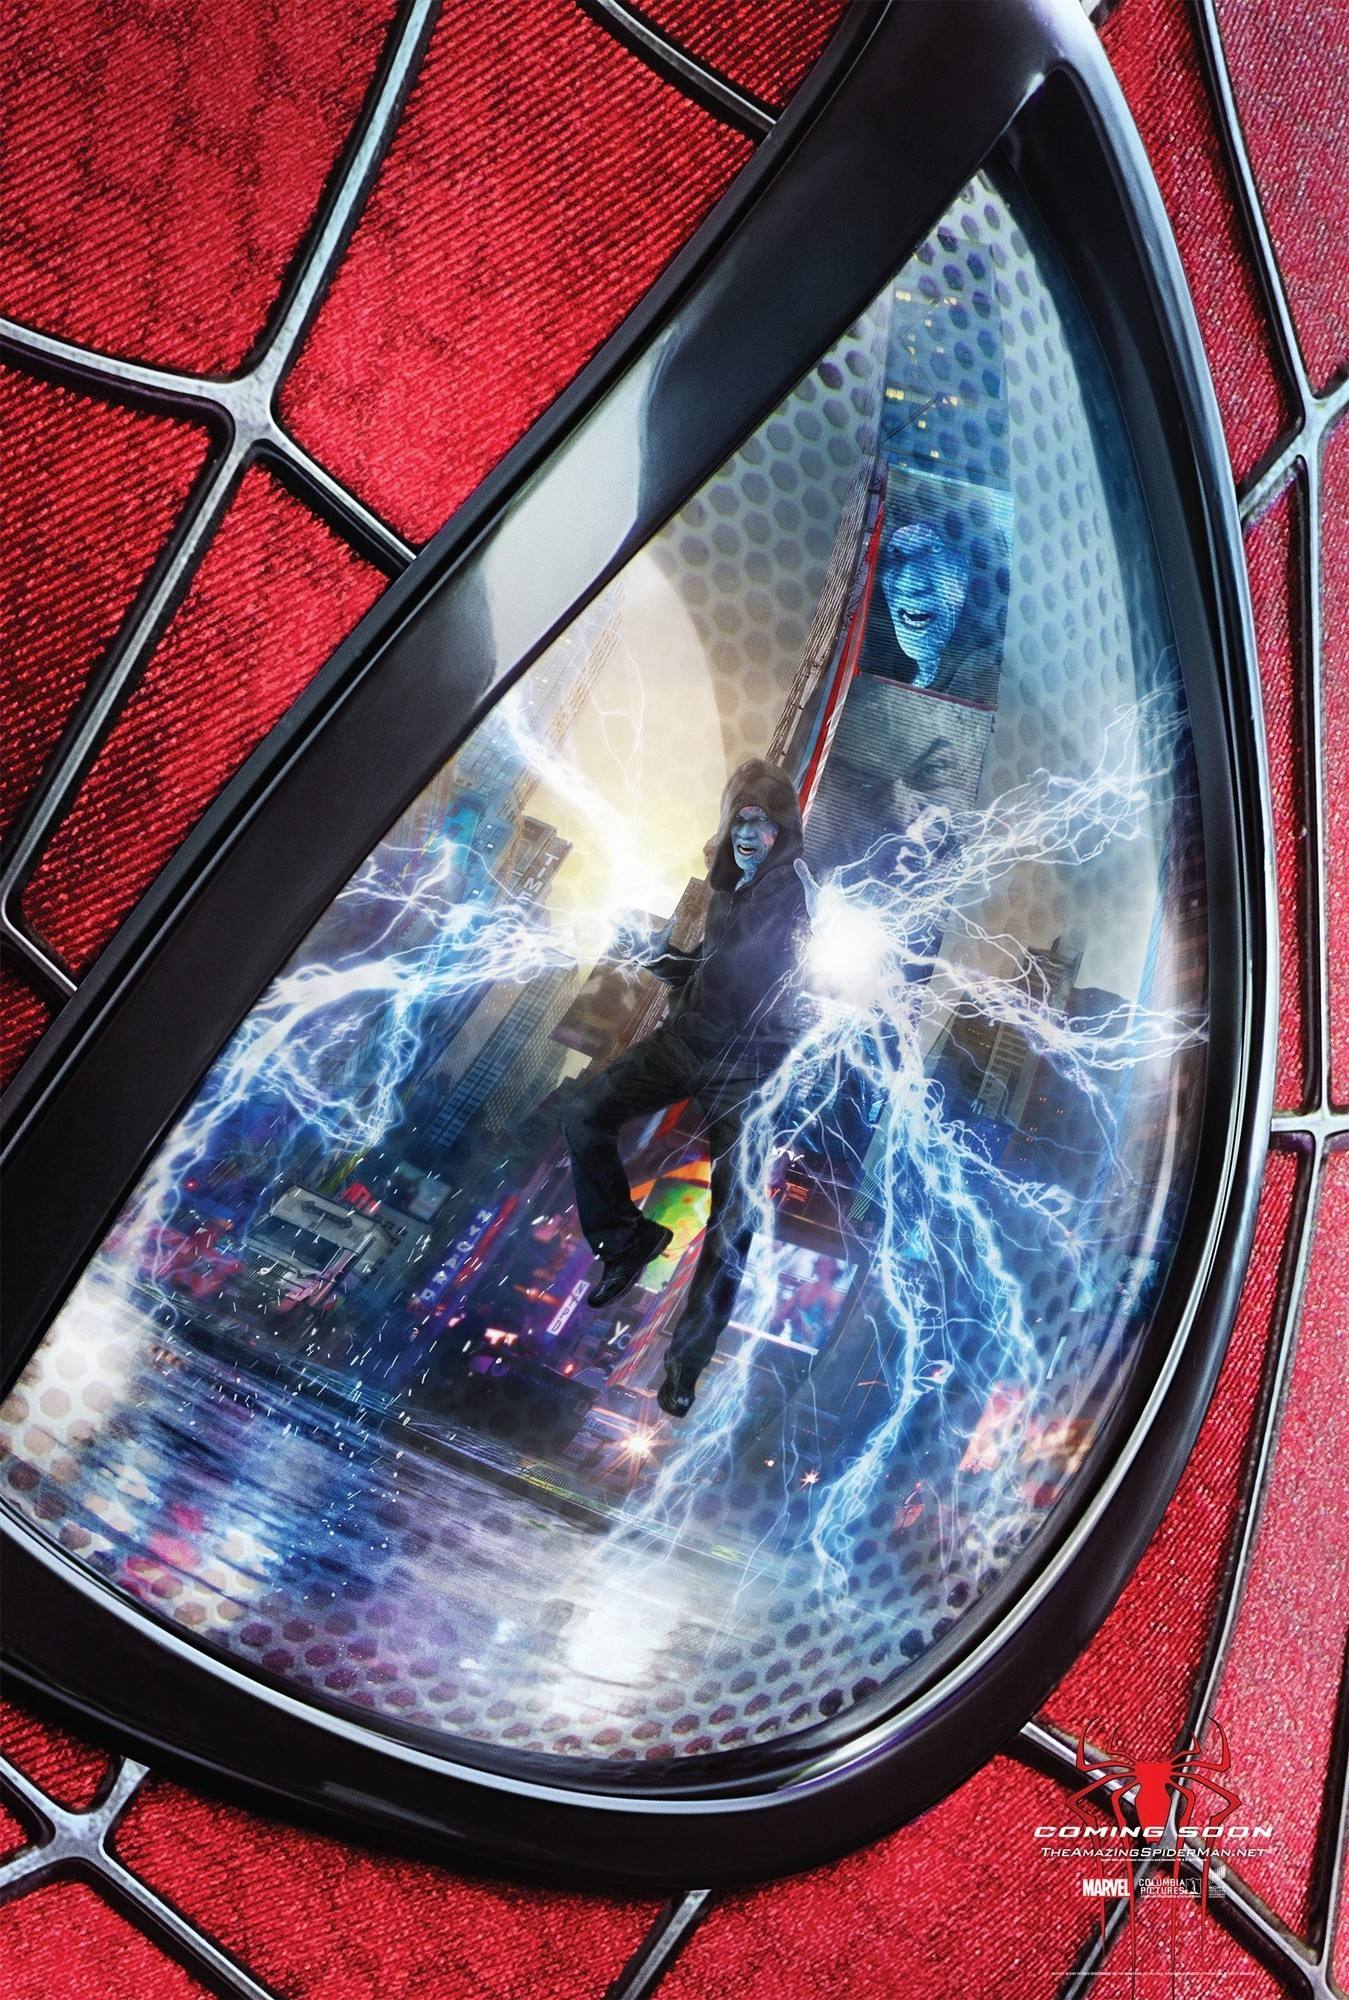 Poster of Columbia Pictures' The Amazing Spider-Man 2 (2014)